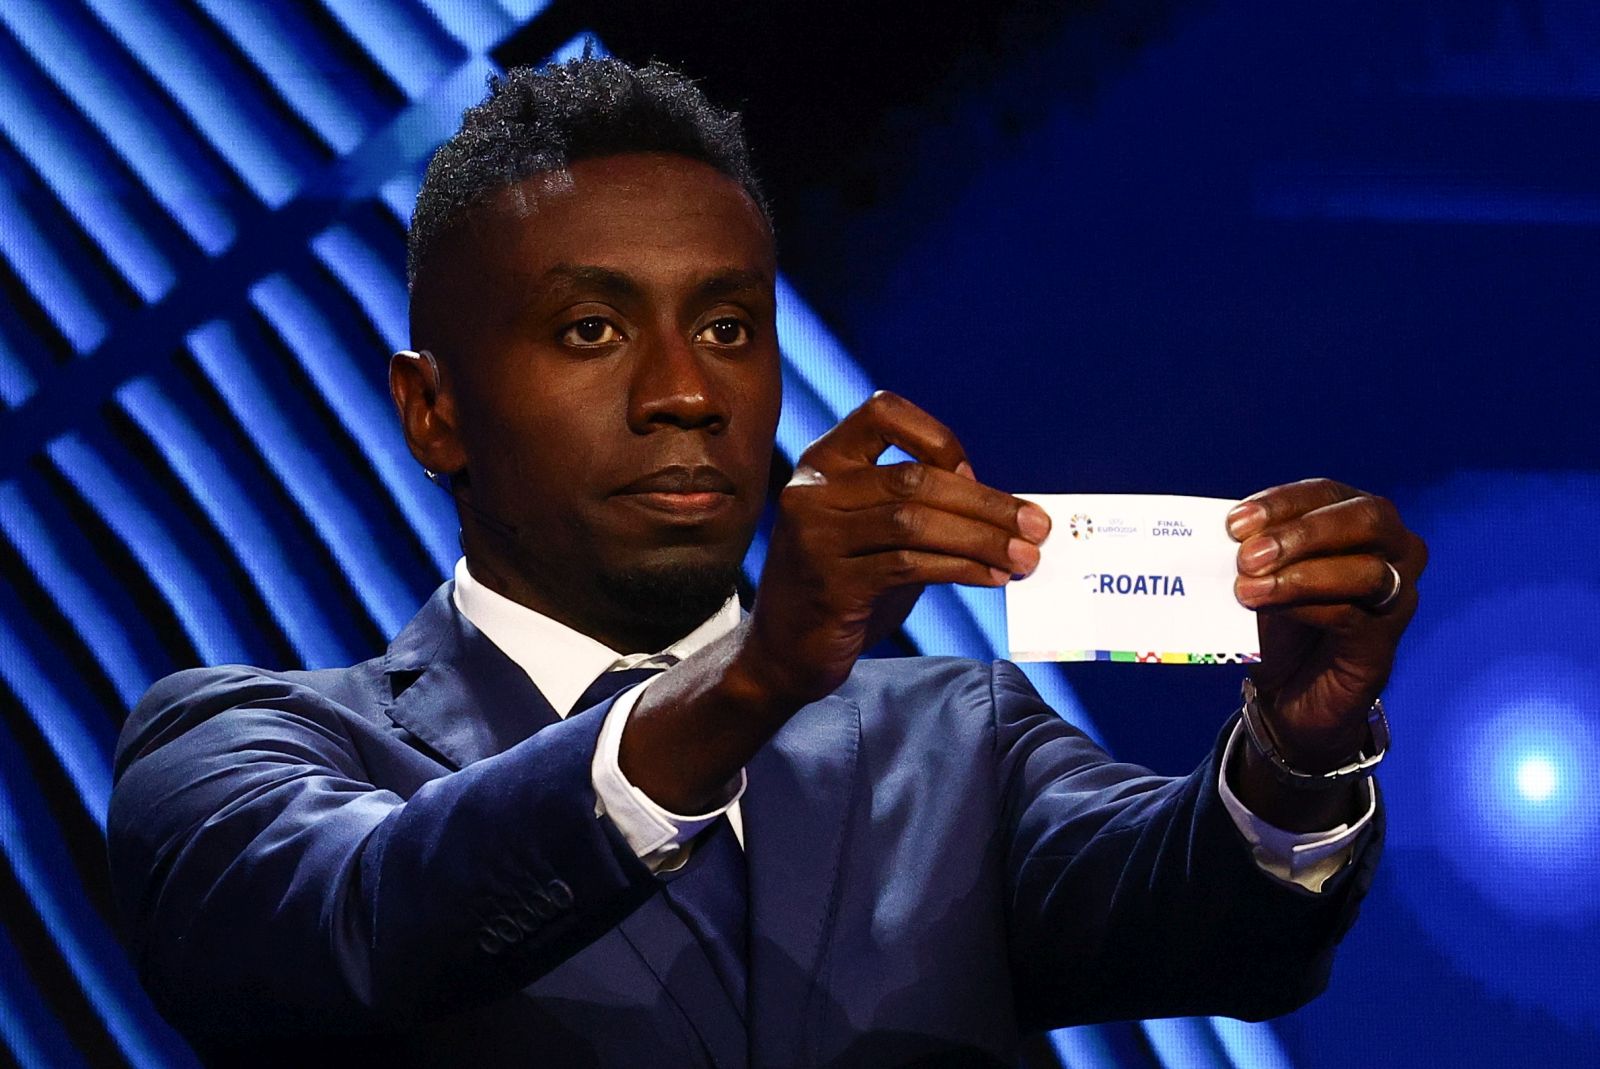 epa11007817 Former French football player Blaise Matuidi holds a ticket of Croatia during the UEFA EURO 2024 final tournament draw at the Elbphilharmonie in Hamburg, Germany, 02 December 2023. The UEFA EURO 2024 will take place in Germany from 14 June to 14 July.  EPA/FILIP SINGER